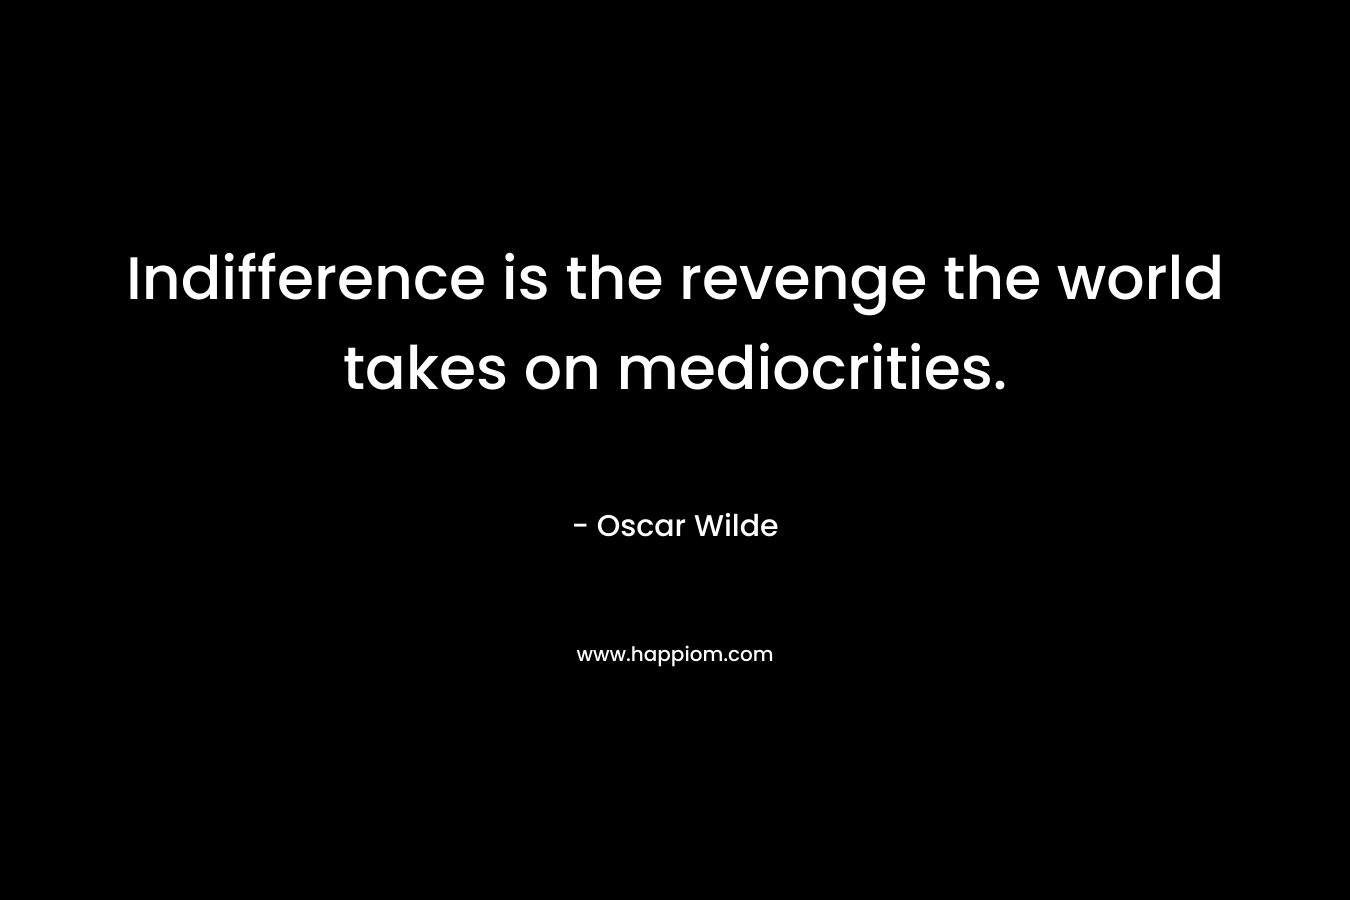 Indifference is the revenge the world takes on mediocrities.